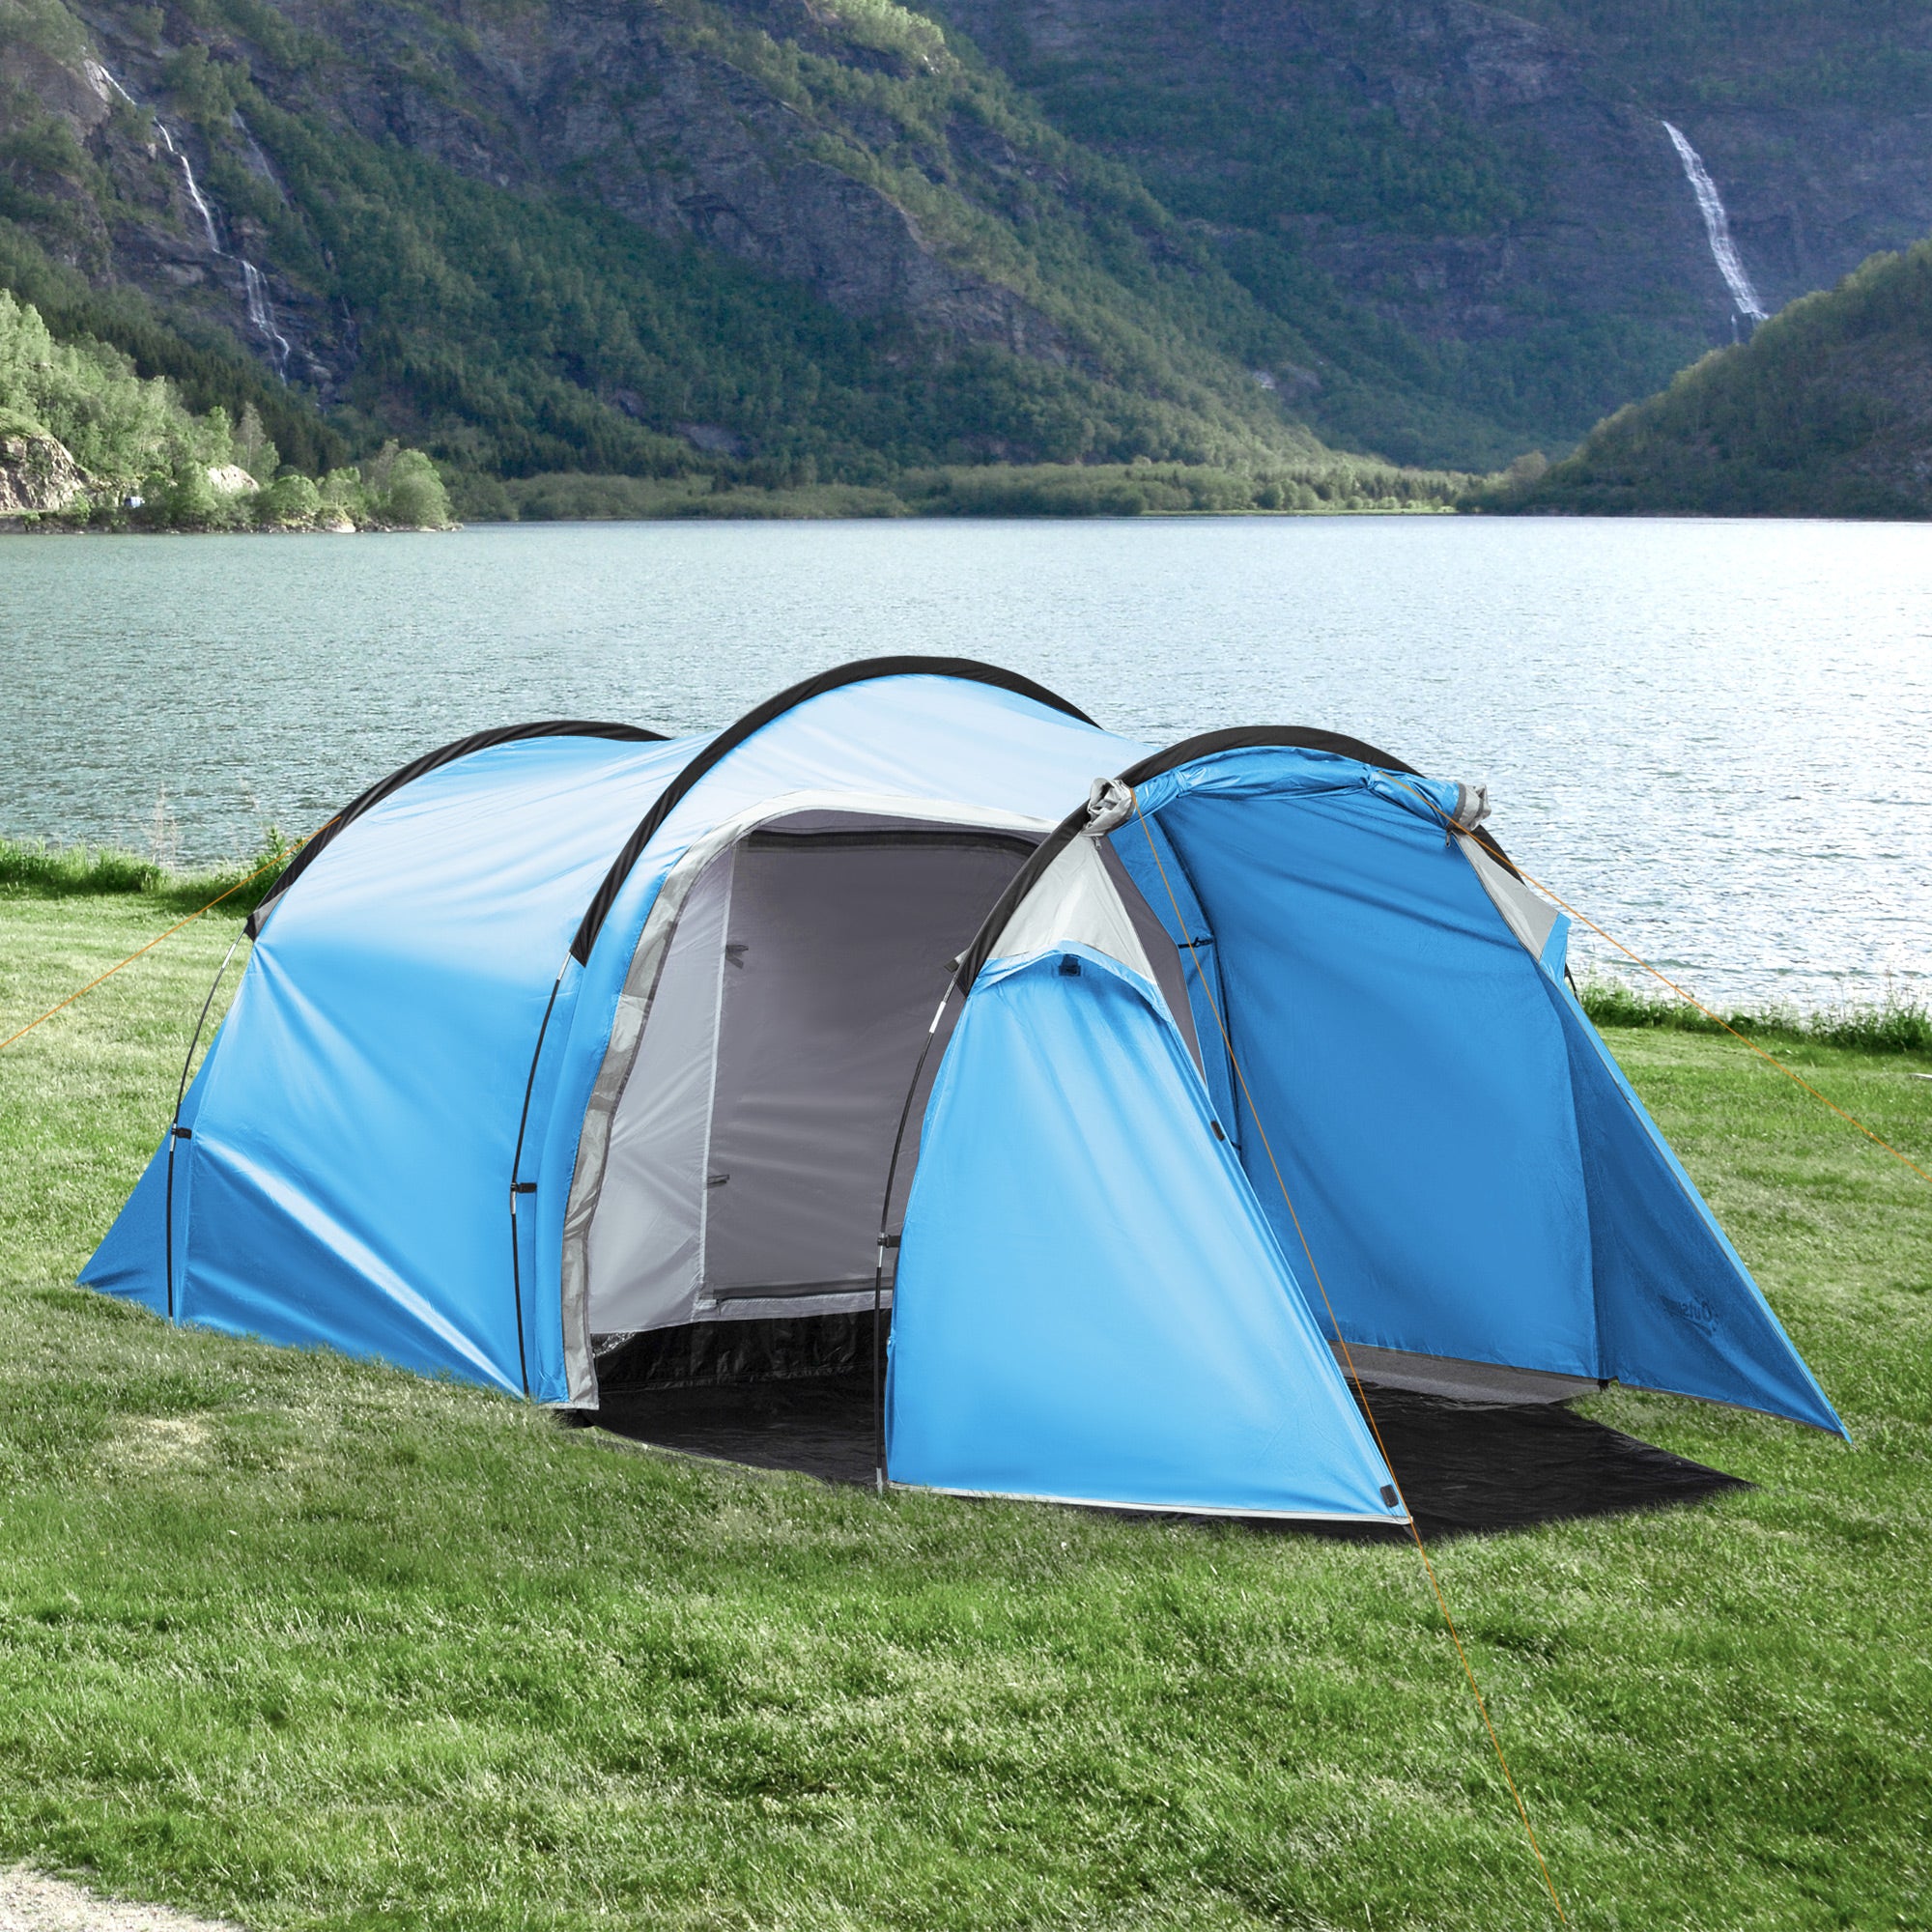 Outsunny 2-3 Man Tunnel Tents w/ Vestibule Camping Tent Porch Air Vents Rainfly Weather-Resistant Shelter Fishing Hiking Festival Shelter Blue - Inspirely